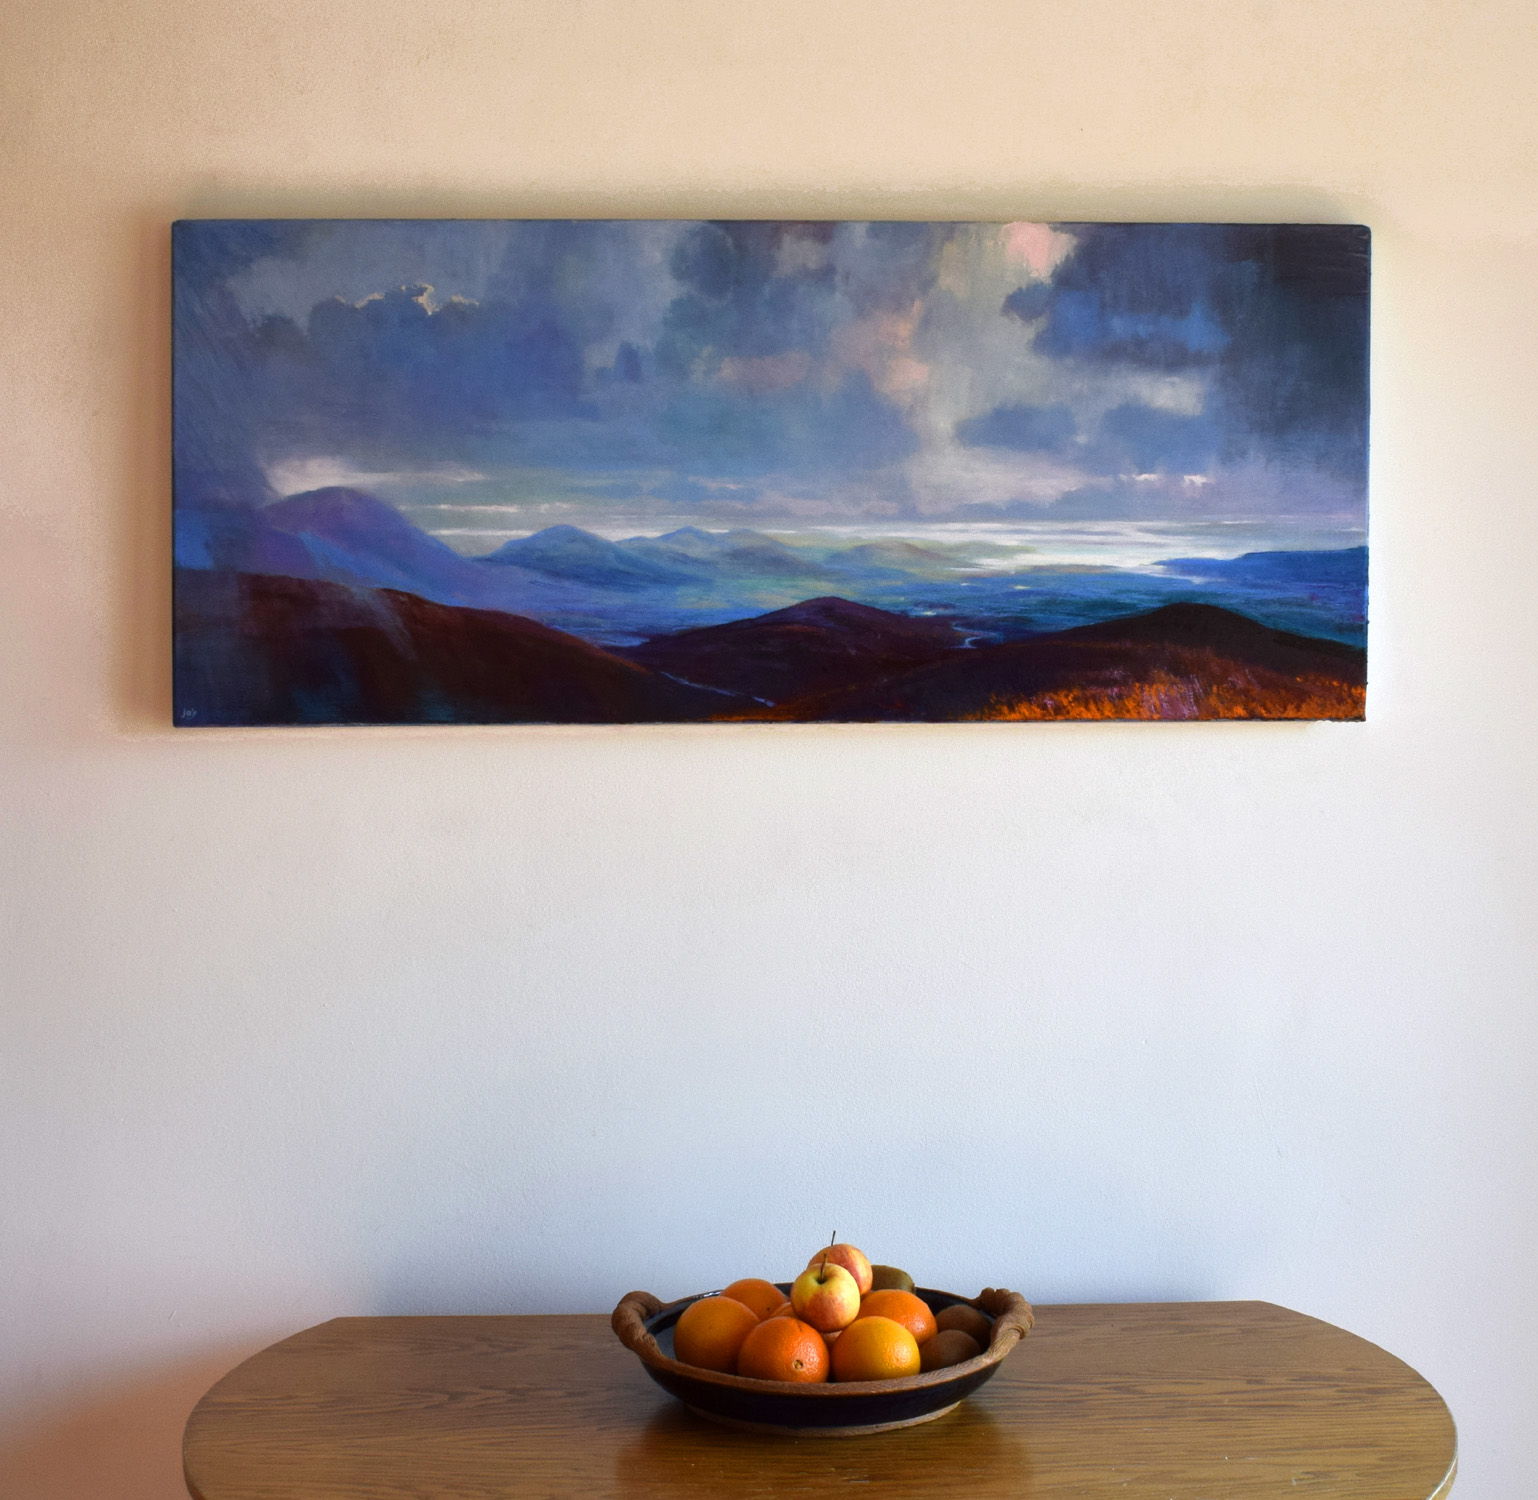 Panoramic west of Ireland oil on canvas painting called 'As Far as the Eye Can See VI' by John O'Grady displayed in living room